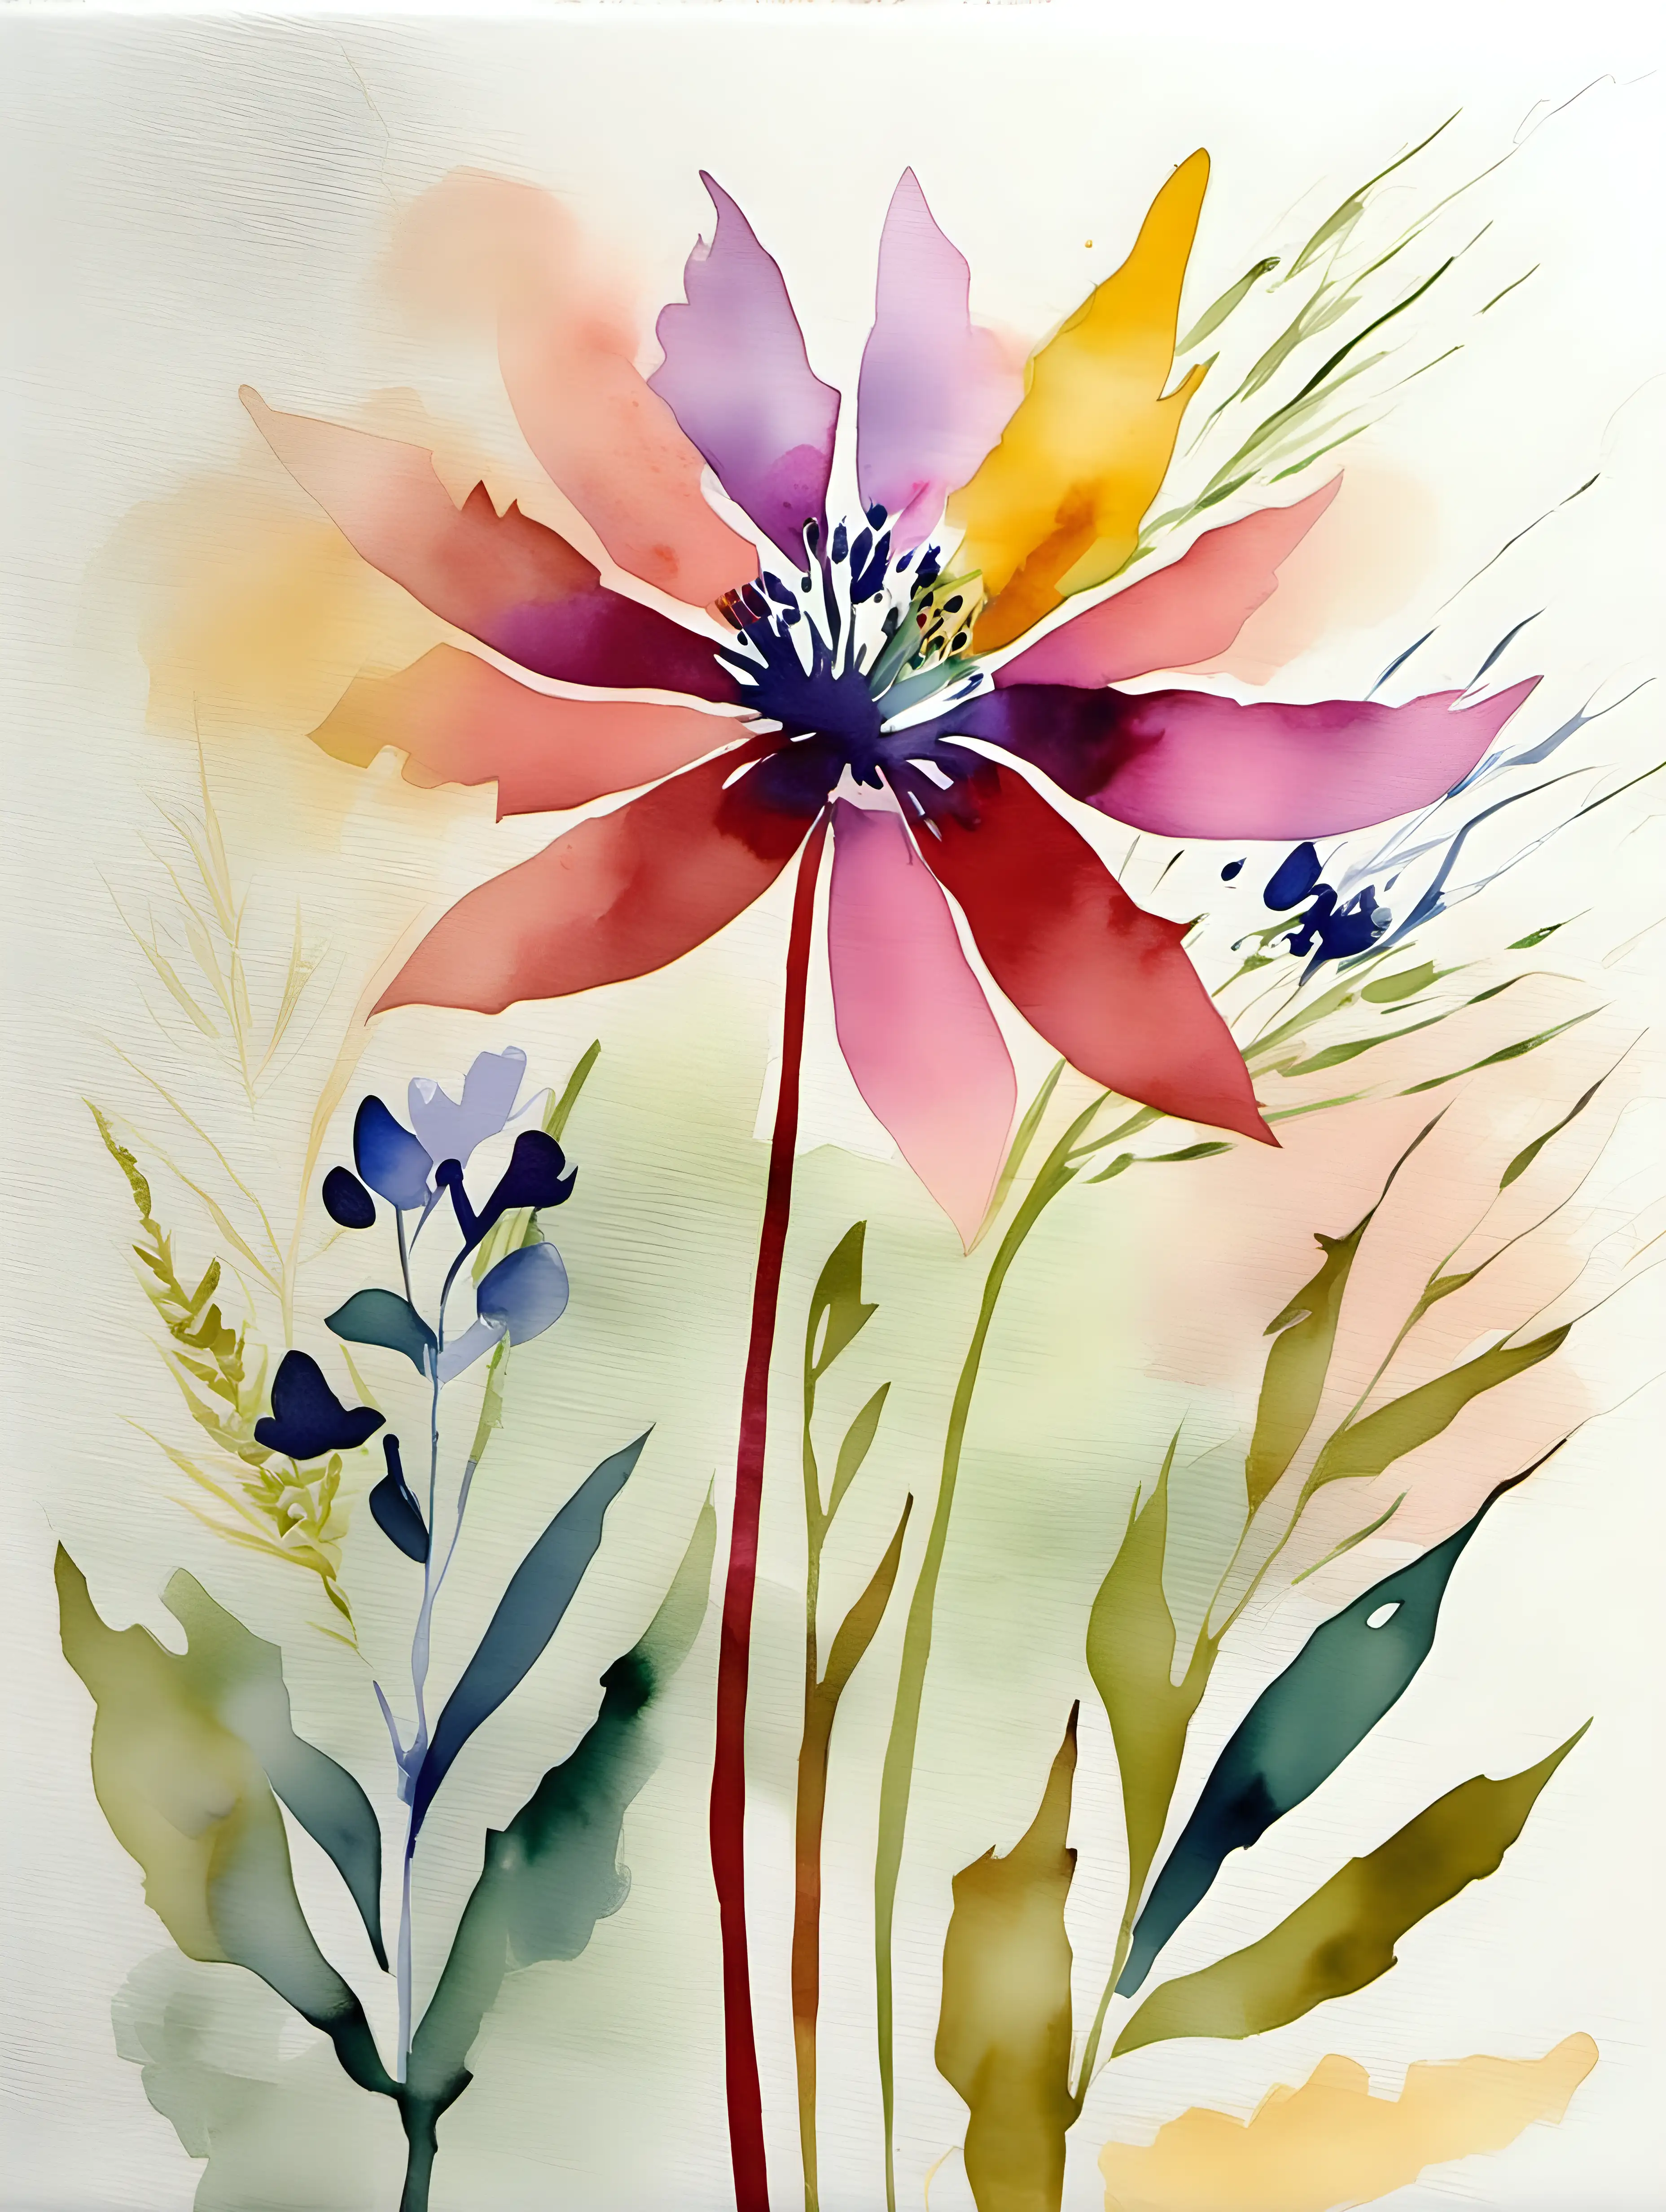 Watercolor Print | Floral Art Print | Abstract Flower Painting | Wildflower Print | Artwork for Walls |